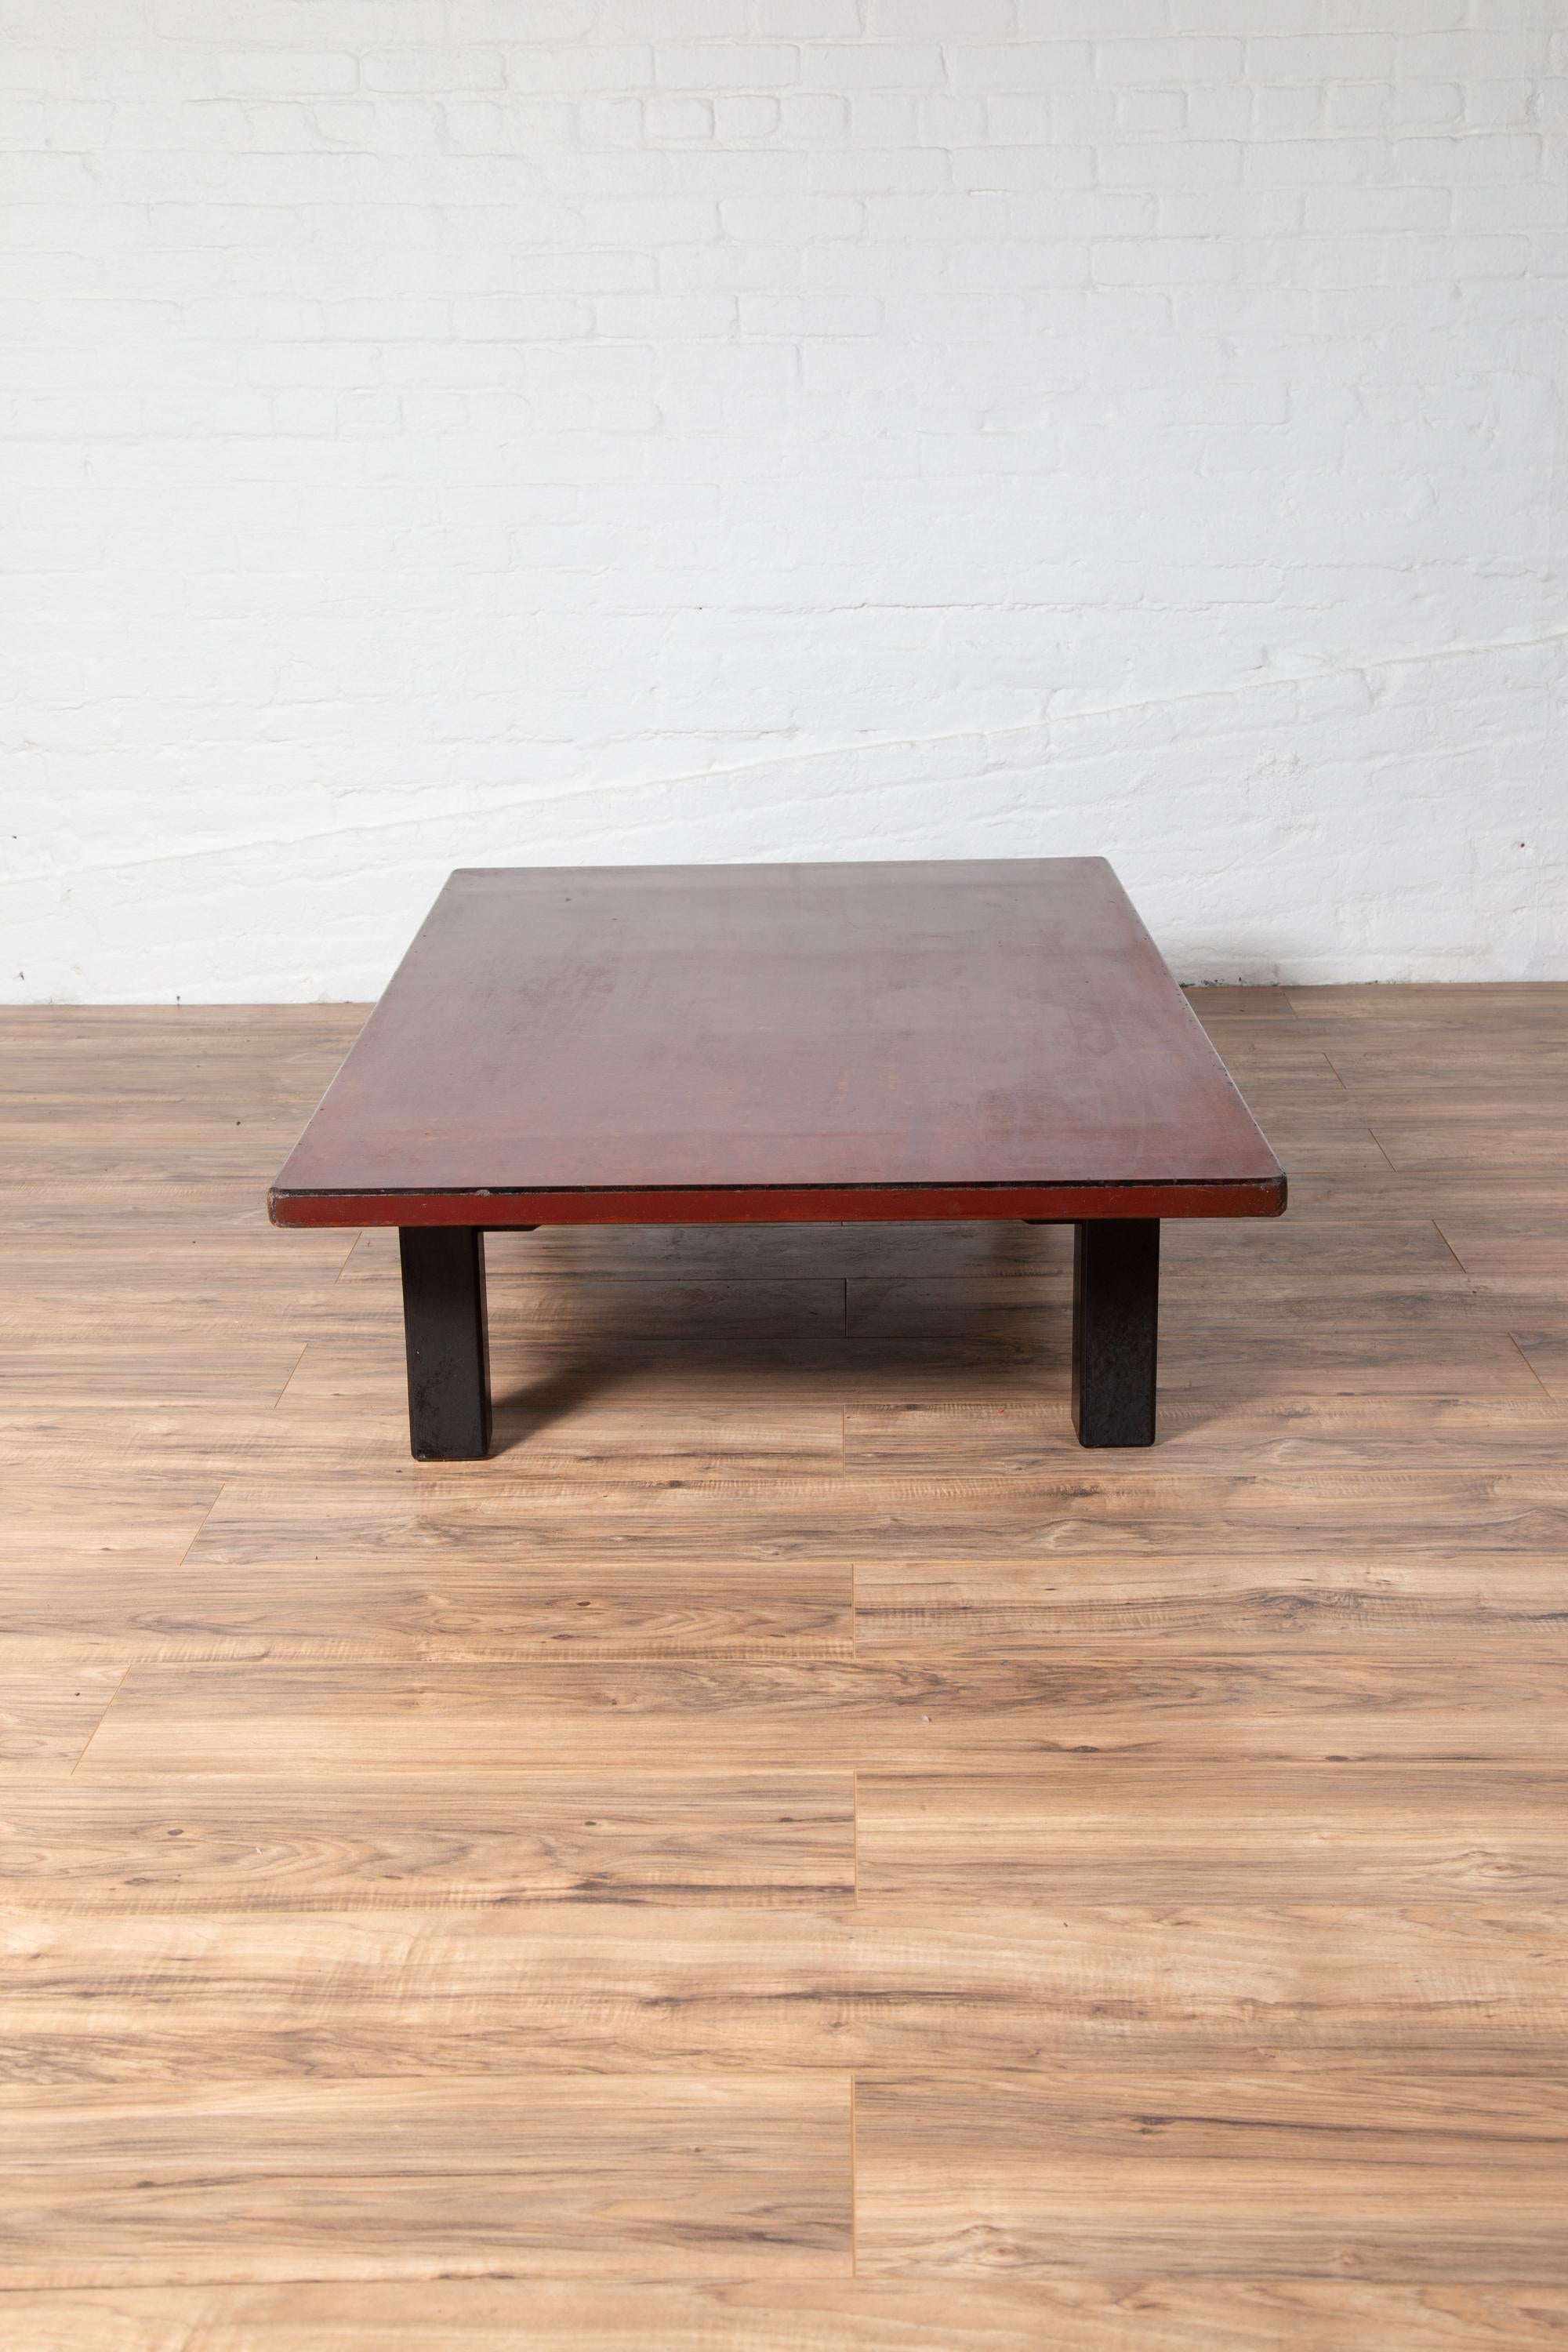 Japanese Taishō Period Early 20th Century Coffee Table with Negora Lacquer For Sale 2